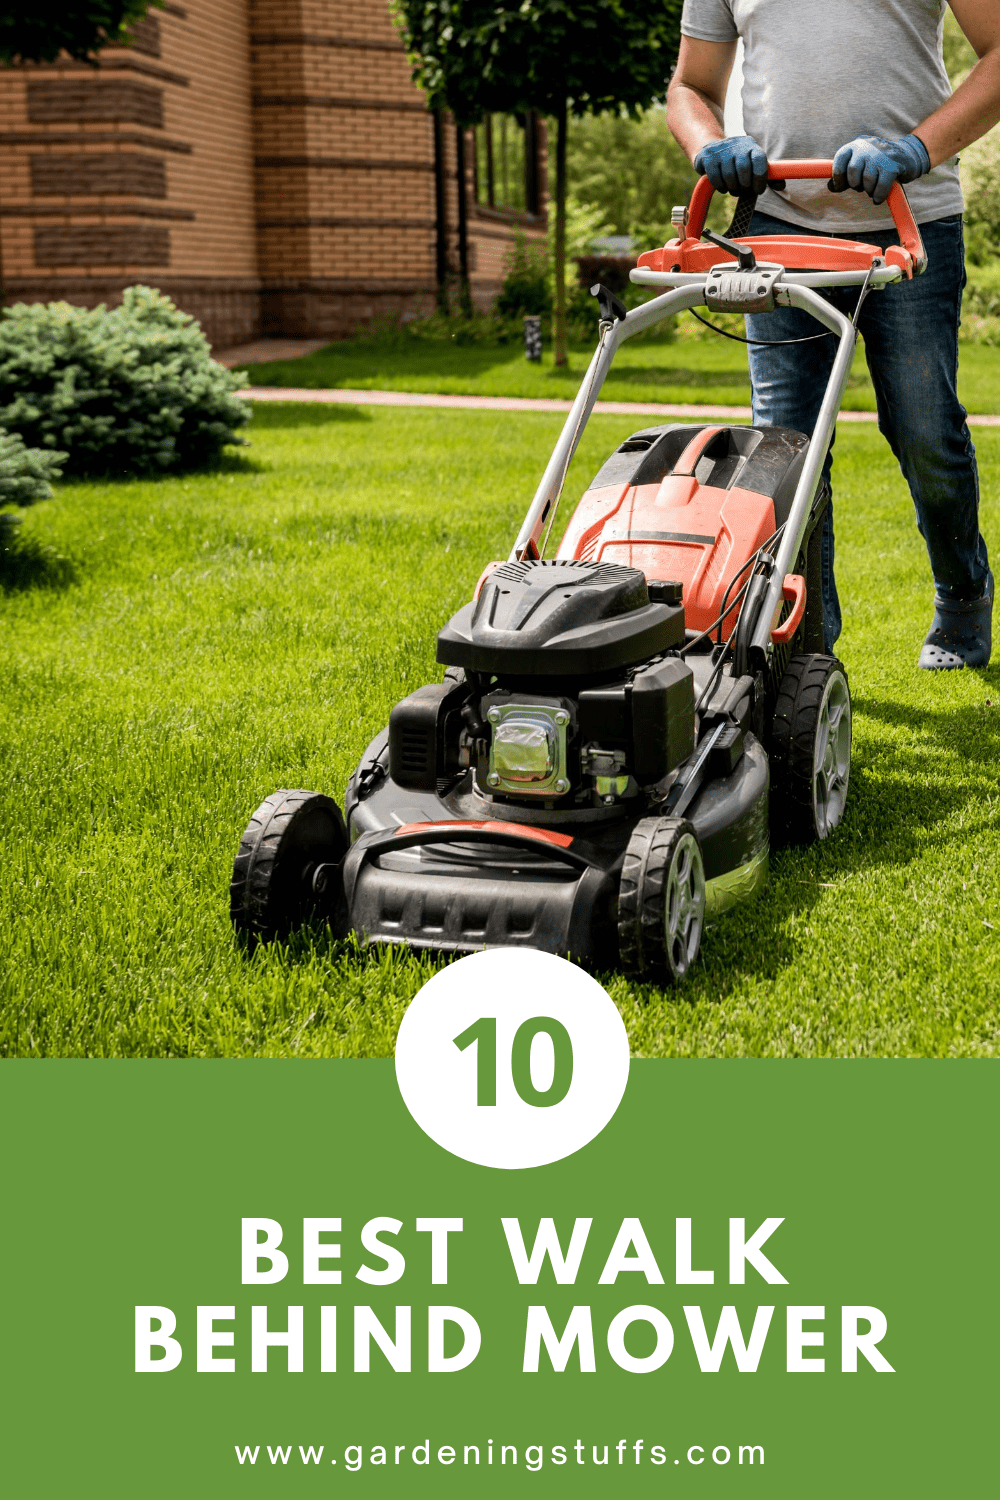 When you want to mow your lawn with less physical strain and effort from pushing, walk-behind mowers are a great solution. All you have to do is turn the motor on, push it forward, and it will start cutting grass. We have come up with a guide and a list of our top 10 best walk-behind lawn mowers to help you buy your next mower. Learn more about gardening tips @ #GardeningStuffs